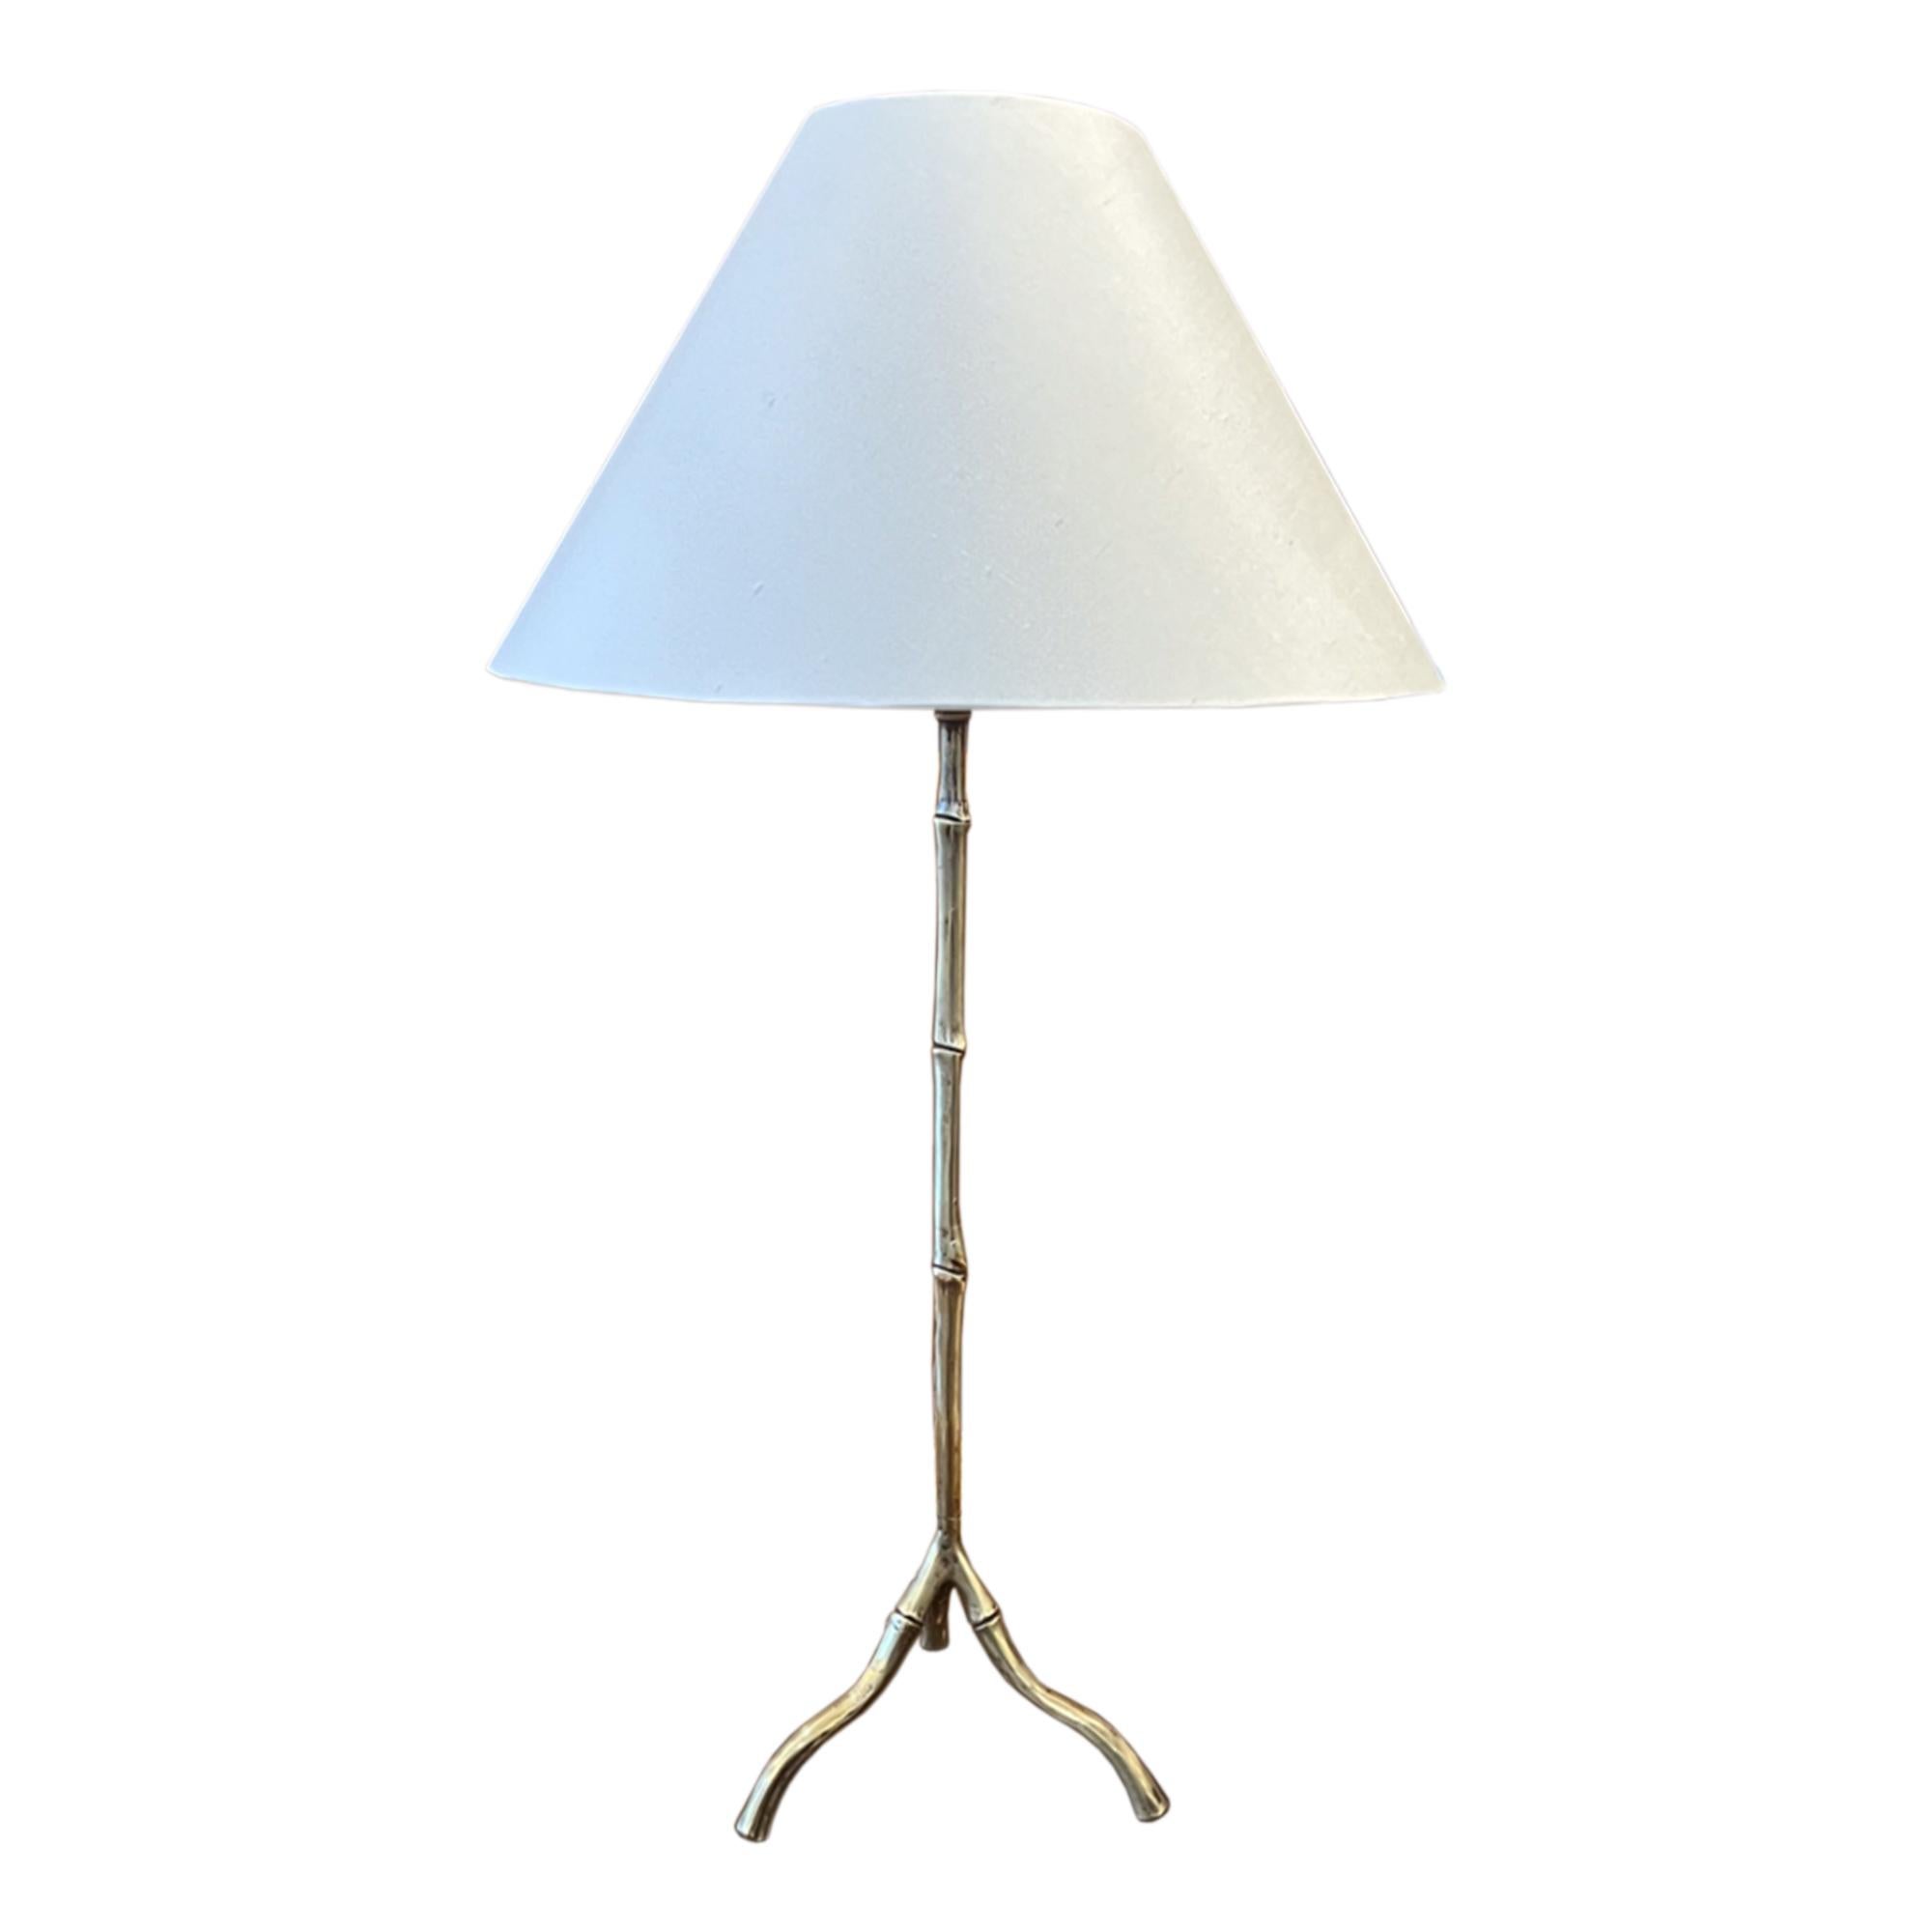 This is a pair of great quality brass table lamps - made in France in the 1960s.

Please take a look at all our pictures to see the lifelike bamboo design - a classic midcentury accessory. 

We've had them rewired with bronze twisted rope flex for